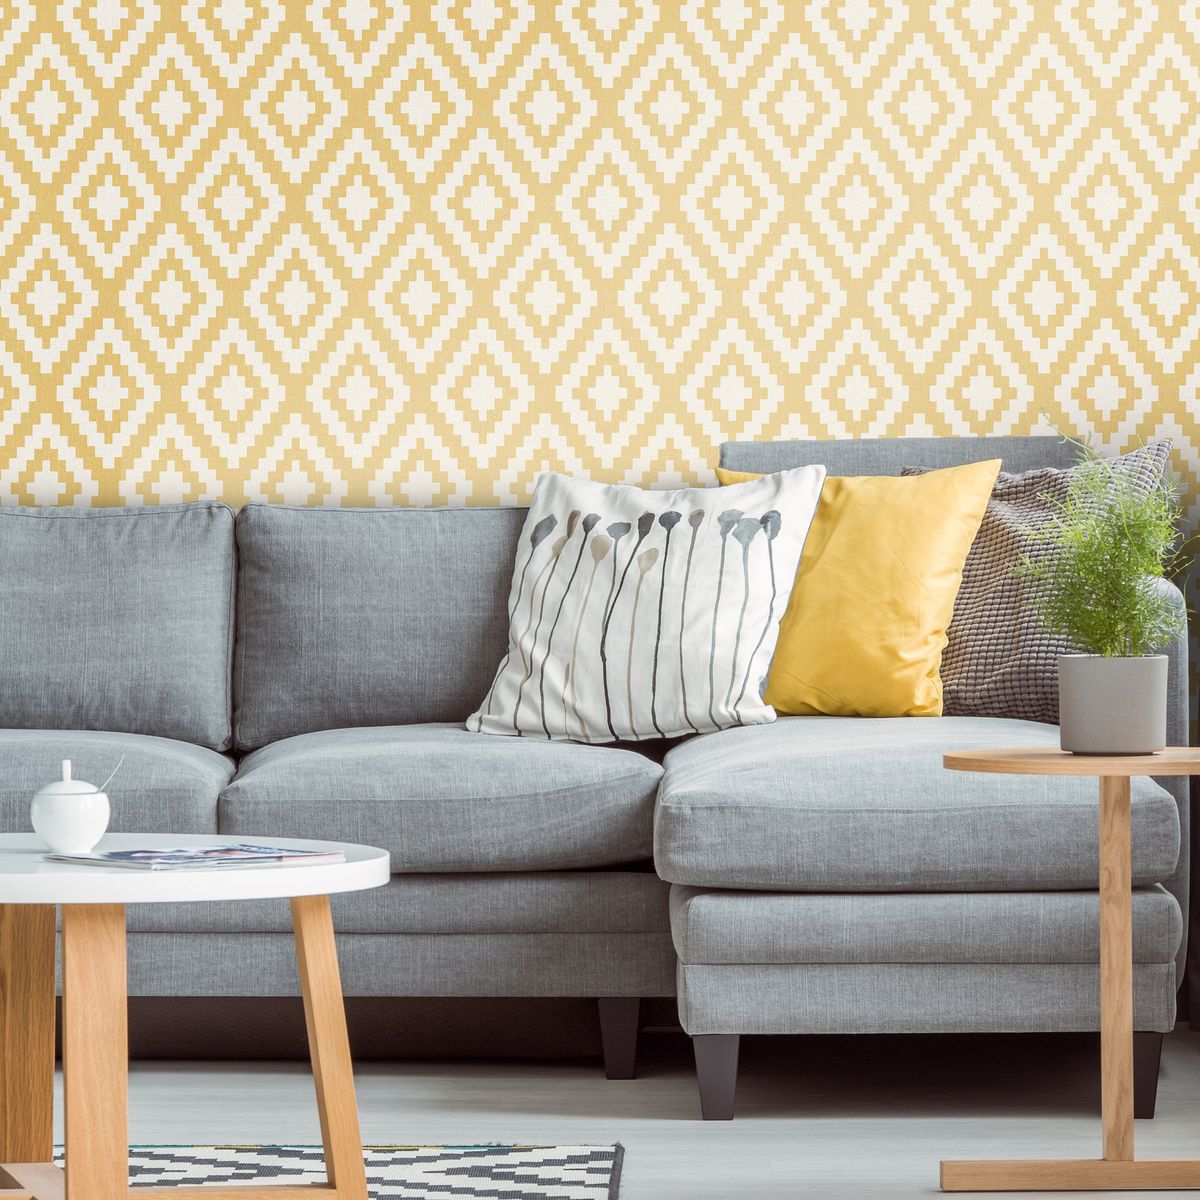 <p>A simple, geometric design that is bold but not overpowering will give a lift to any living room. This combination uses the softer end of the palette with a chalky grey linen upholstered sofa and muted yellow walls.</p><p><em>Top Tip: </em>Choose cushions that complement the colour scheme but also add pattern and texture.</p><p><em>Pictured: Geometric Mustard, <a href="https://www.ilovewallpaper.co.uk/wallpaper-c1/fabric-geometric-wallpaper-mustard-p7254/s7390">I Love Wallpaper</a></em></p>